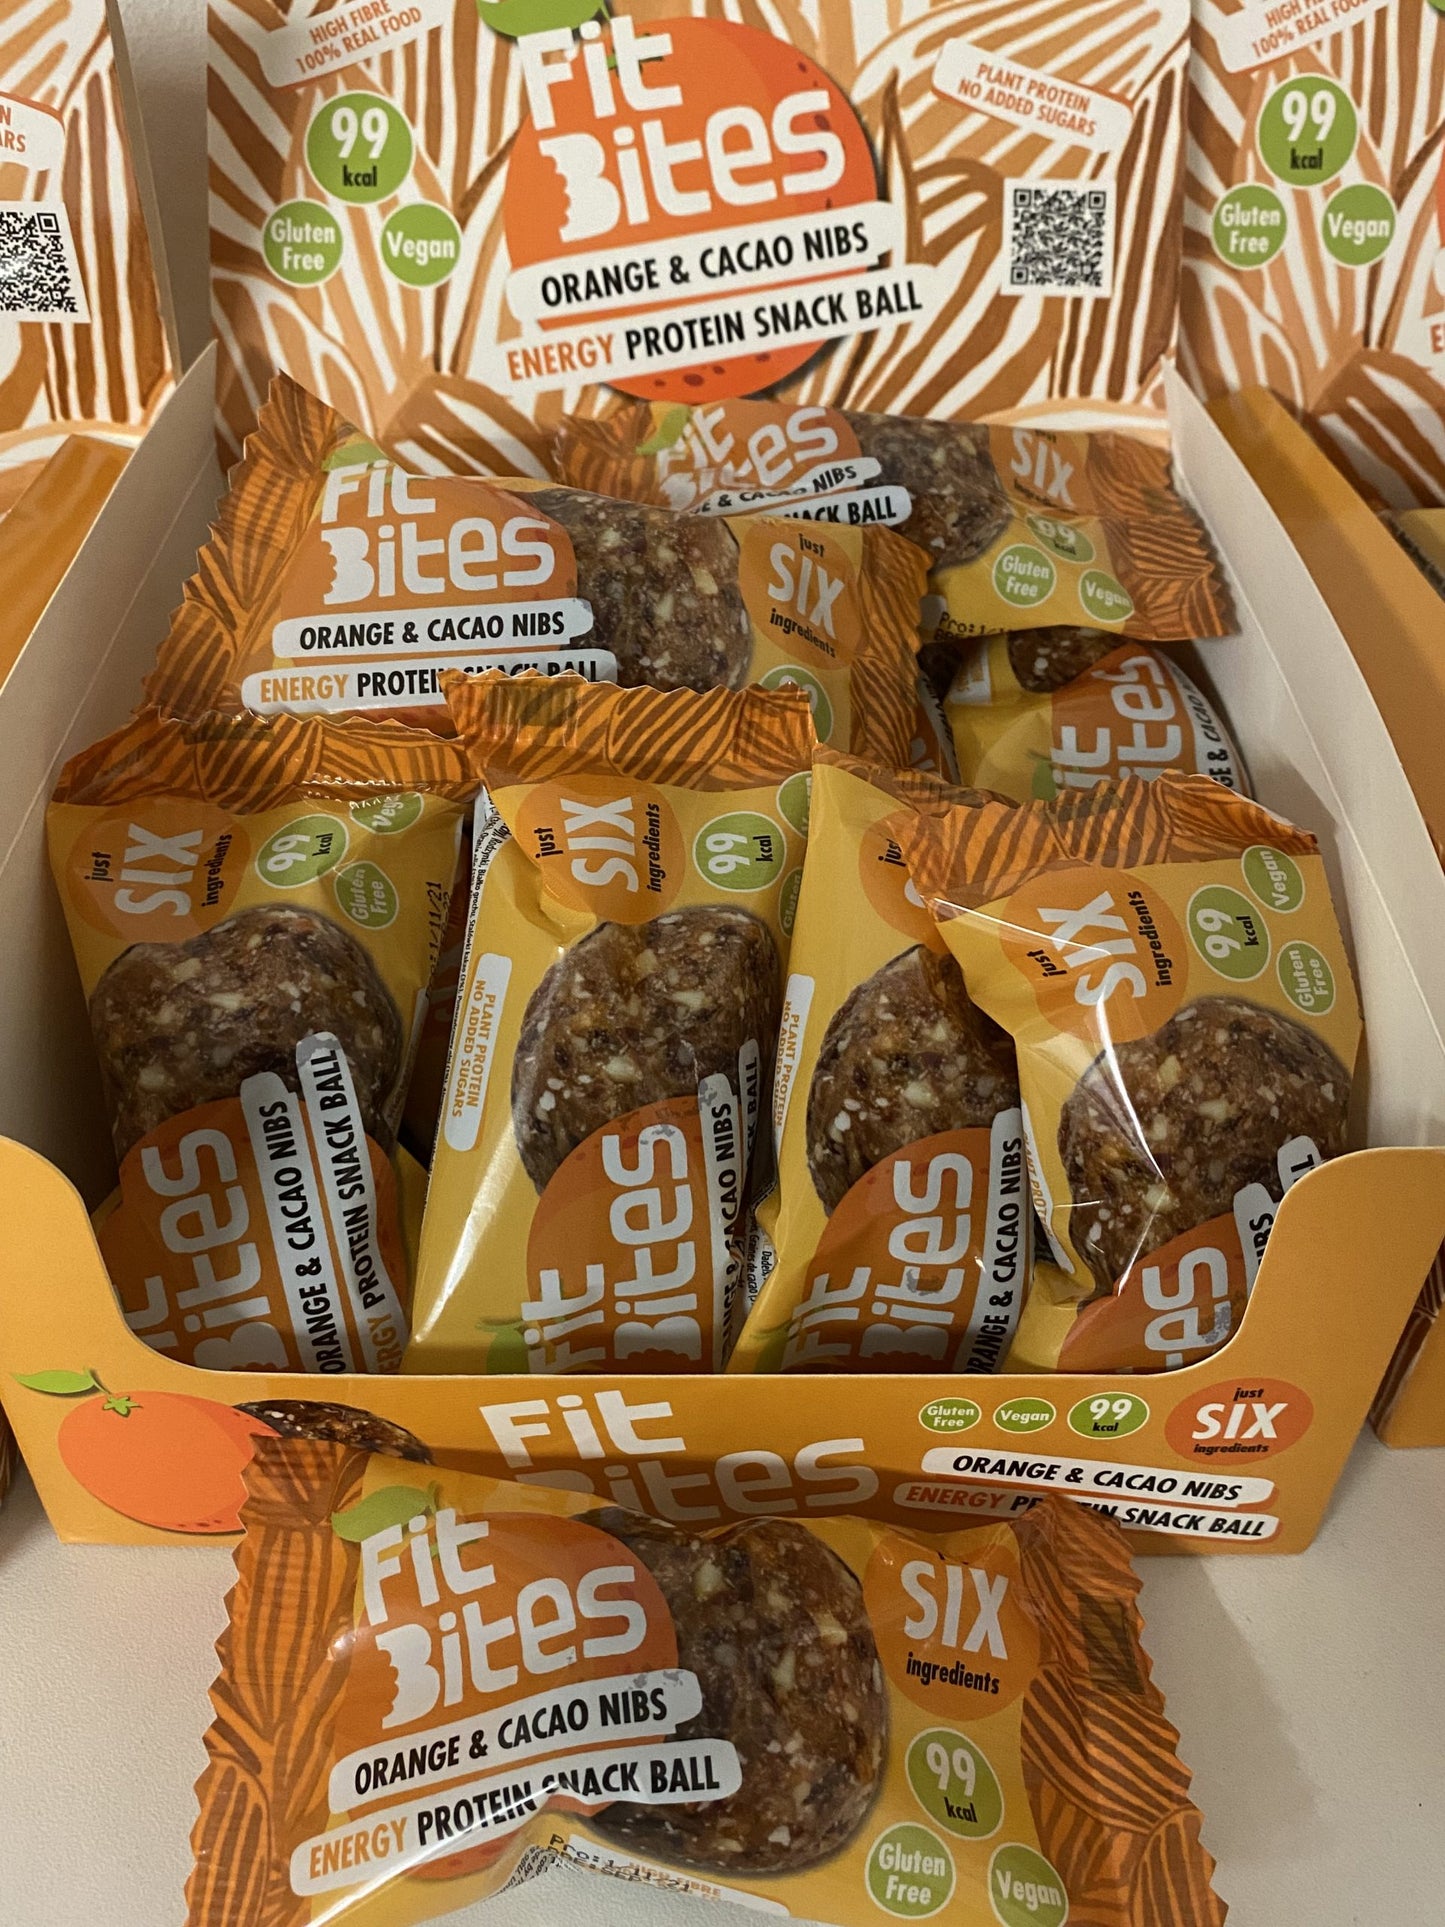 Orange & Cacao Nibs Energy Protein Snack Ball (x18)